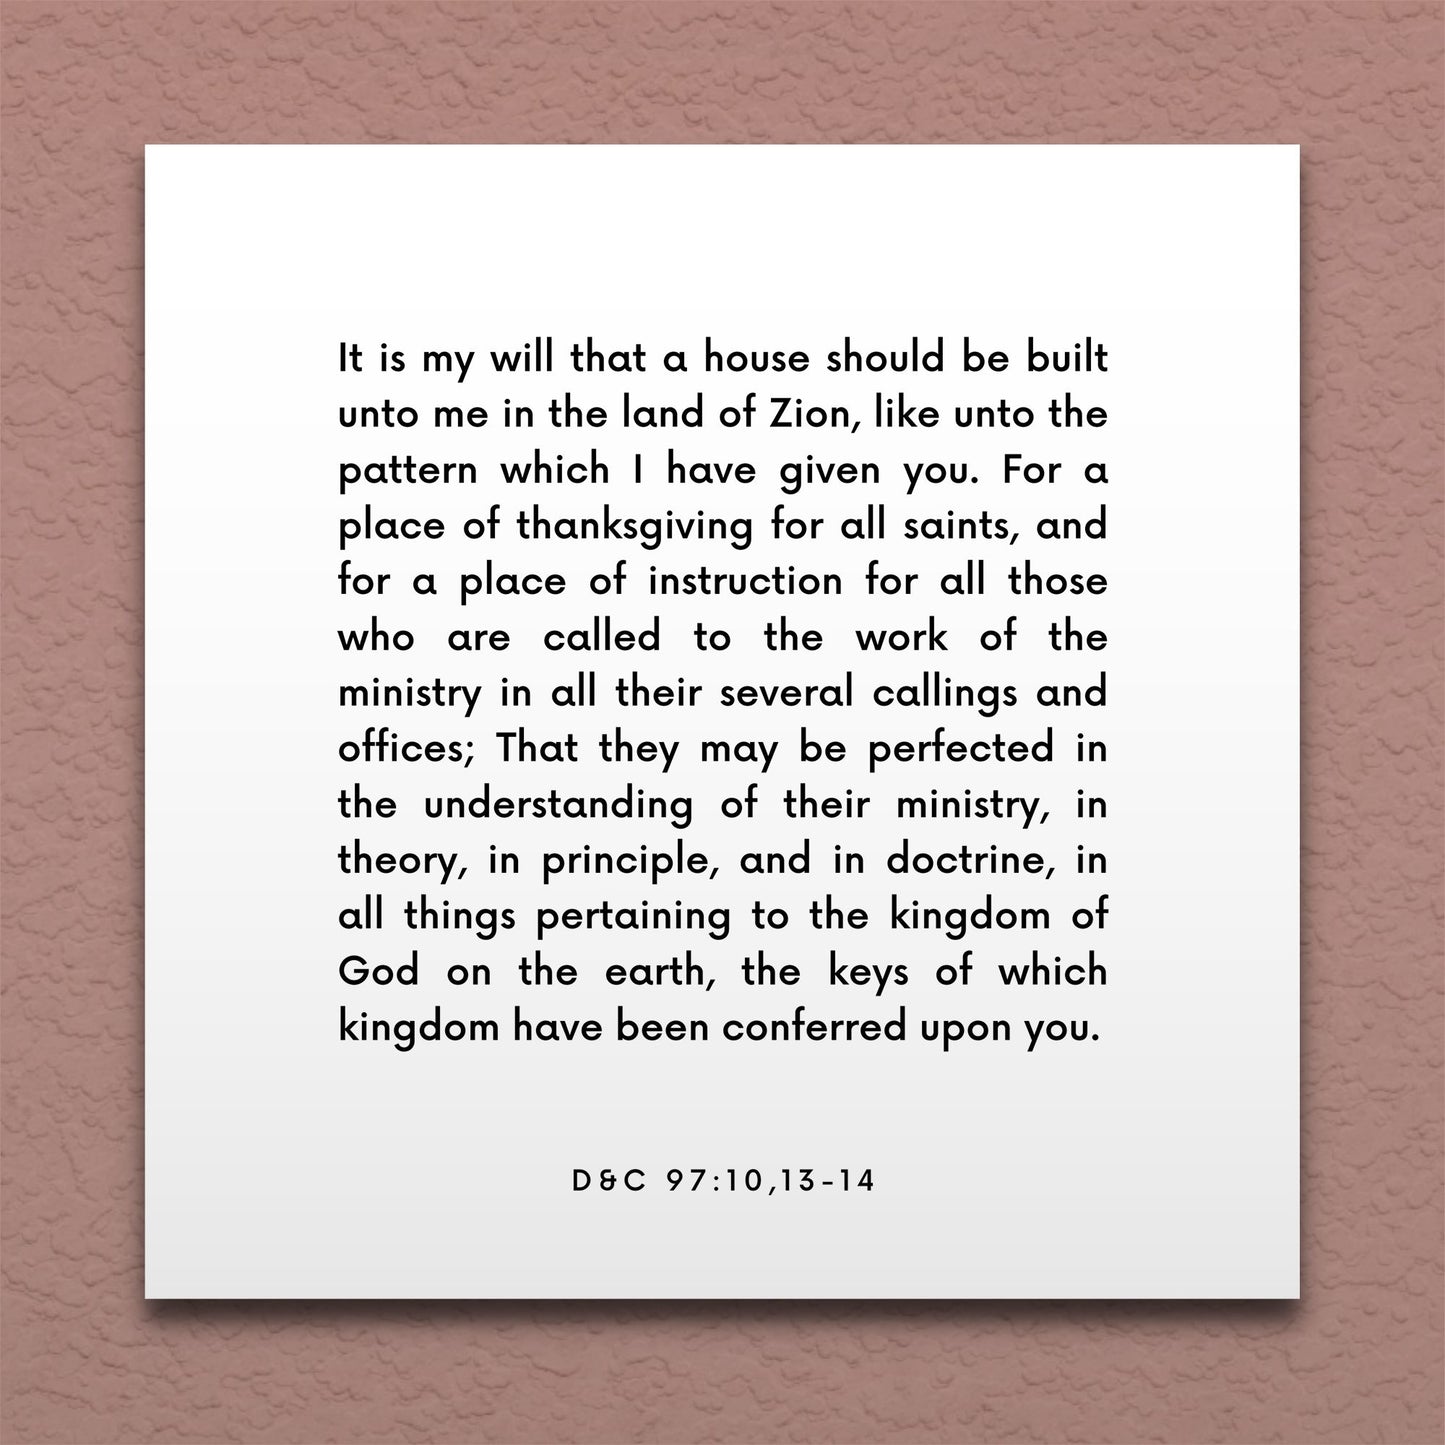 Wall-mounted scripture tile for D&C 97:10,13-14 - "It is my will that a house should be built unto me"